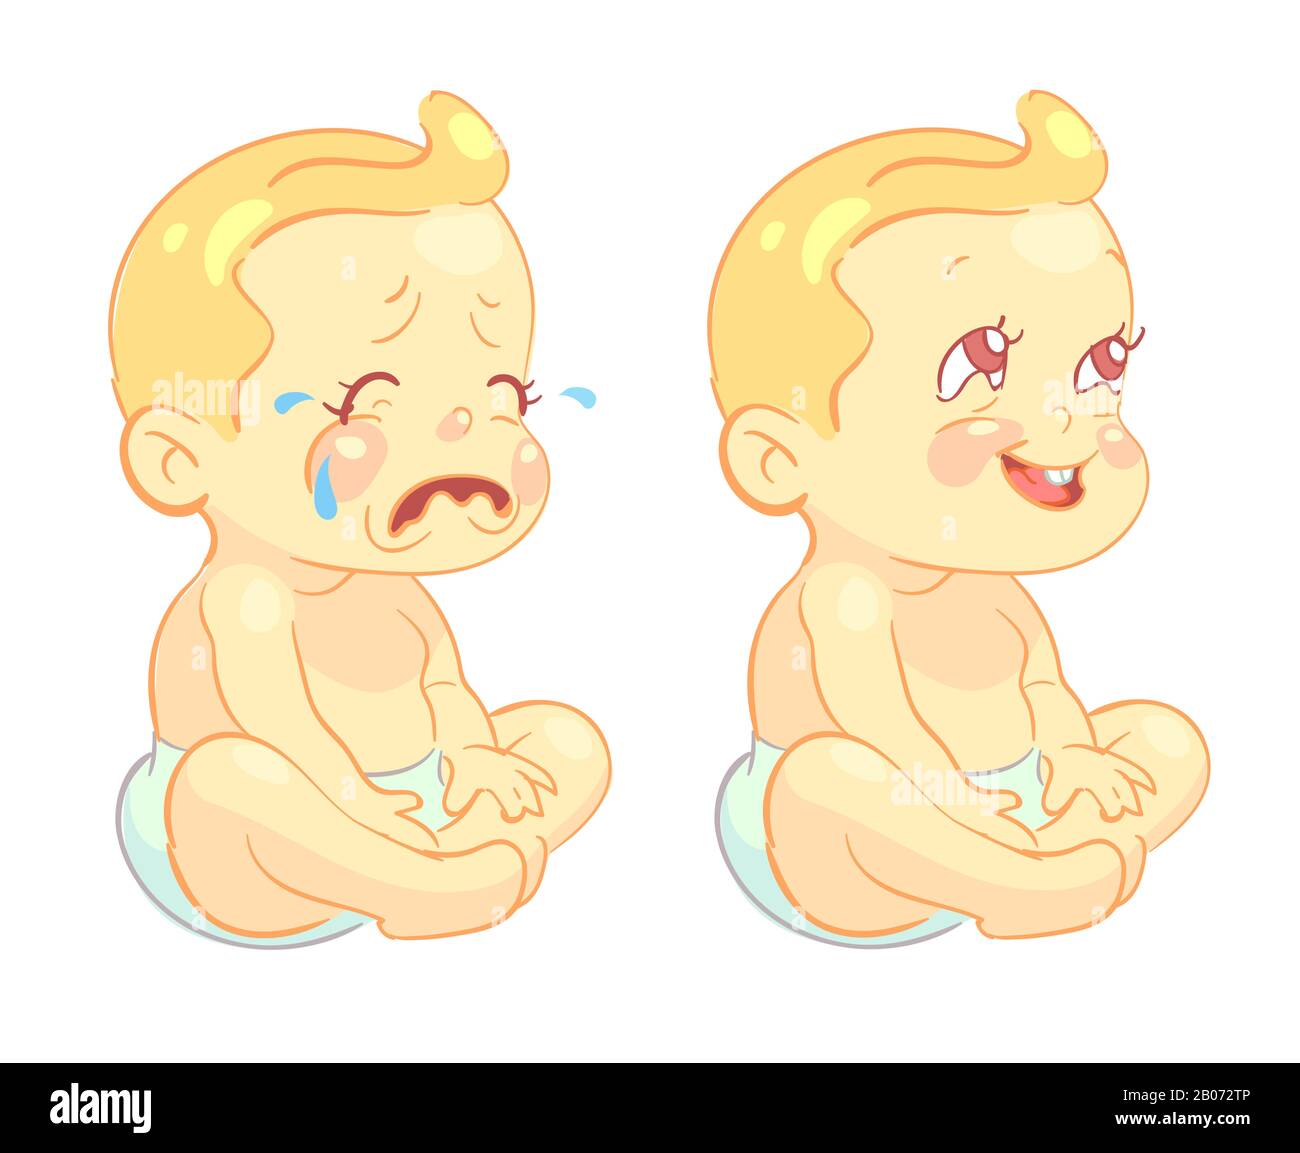 Smiling toddler baby and crying baby vector characters. Infant with happy mood and newborn crying illustration Stock Vector